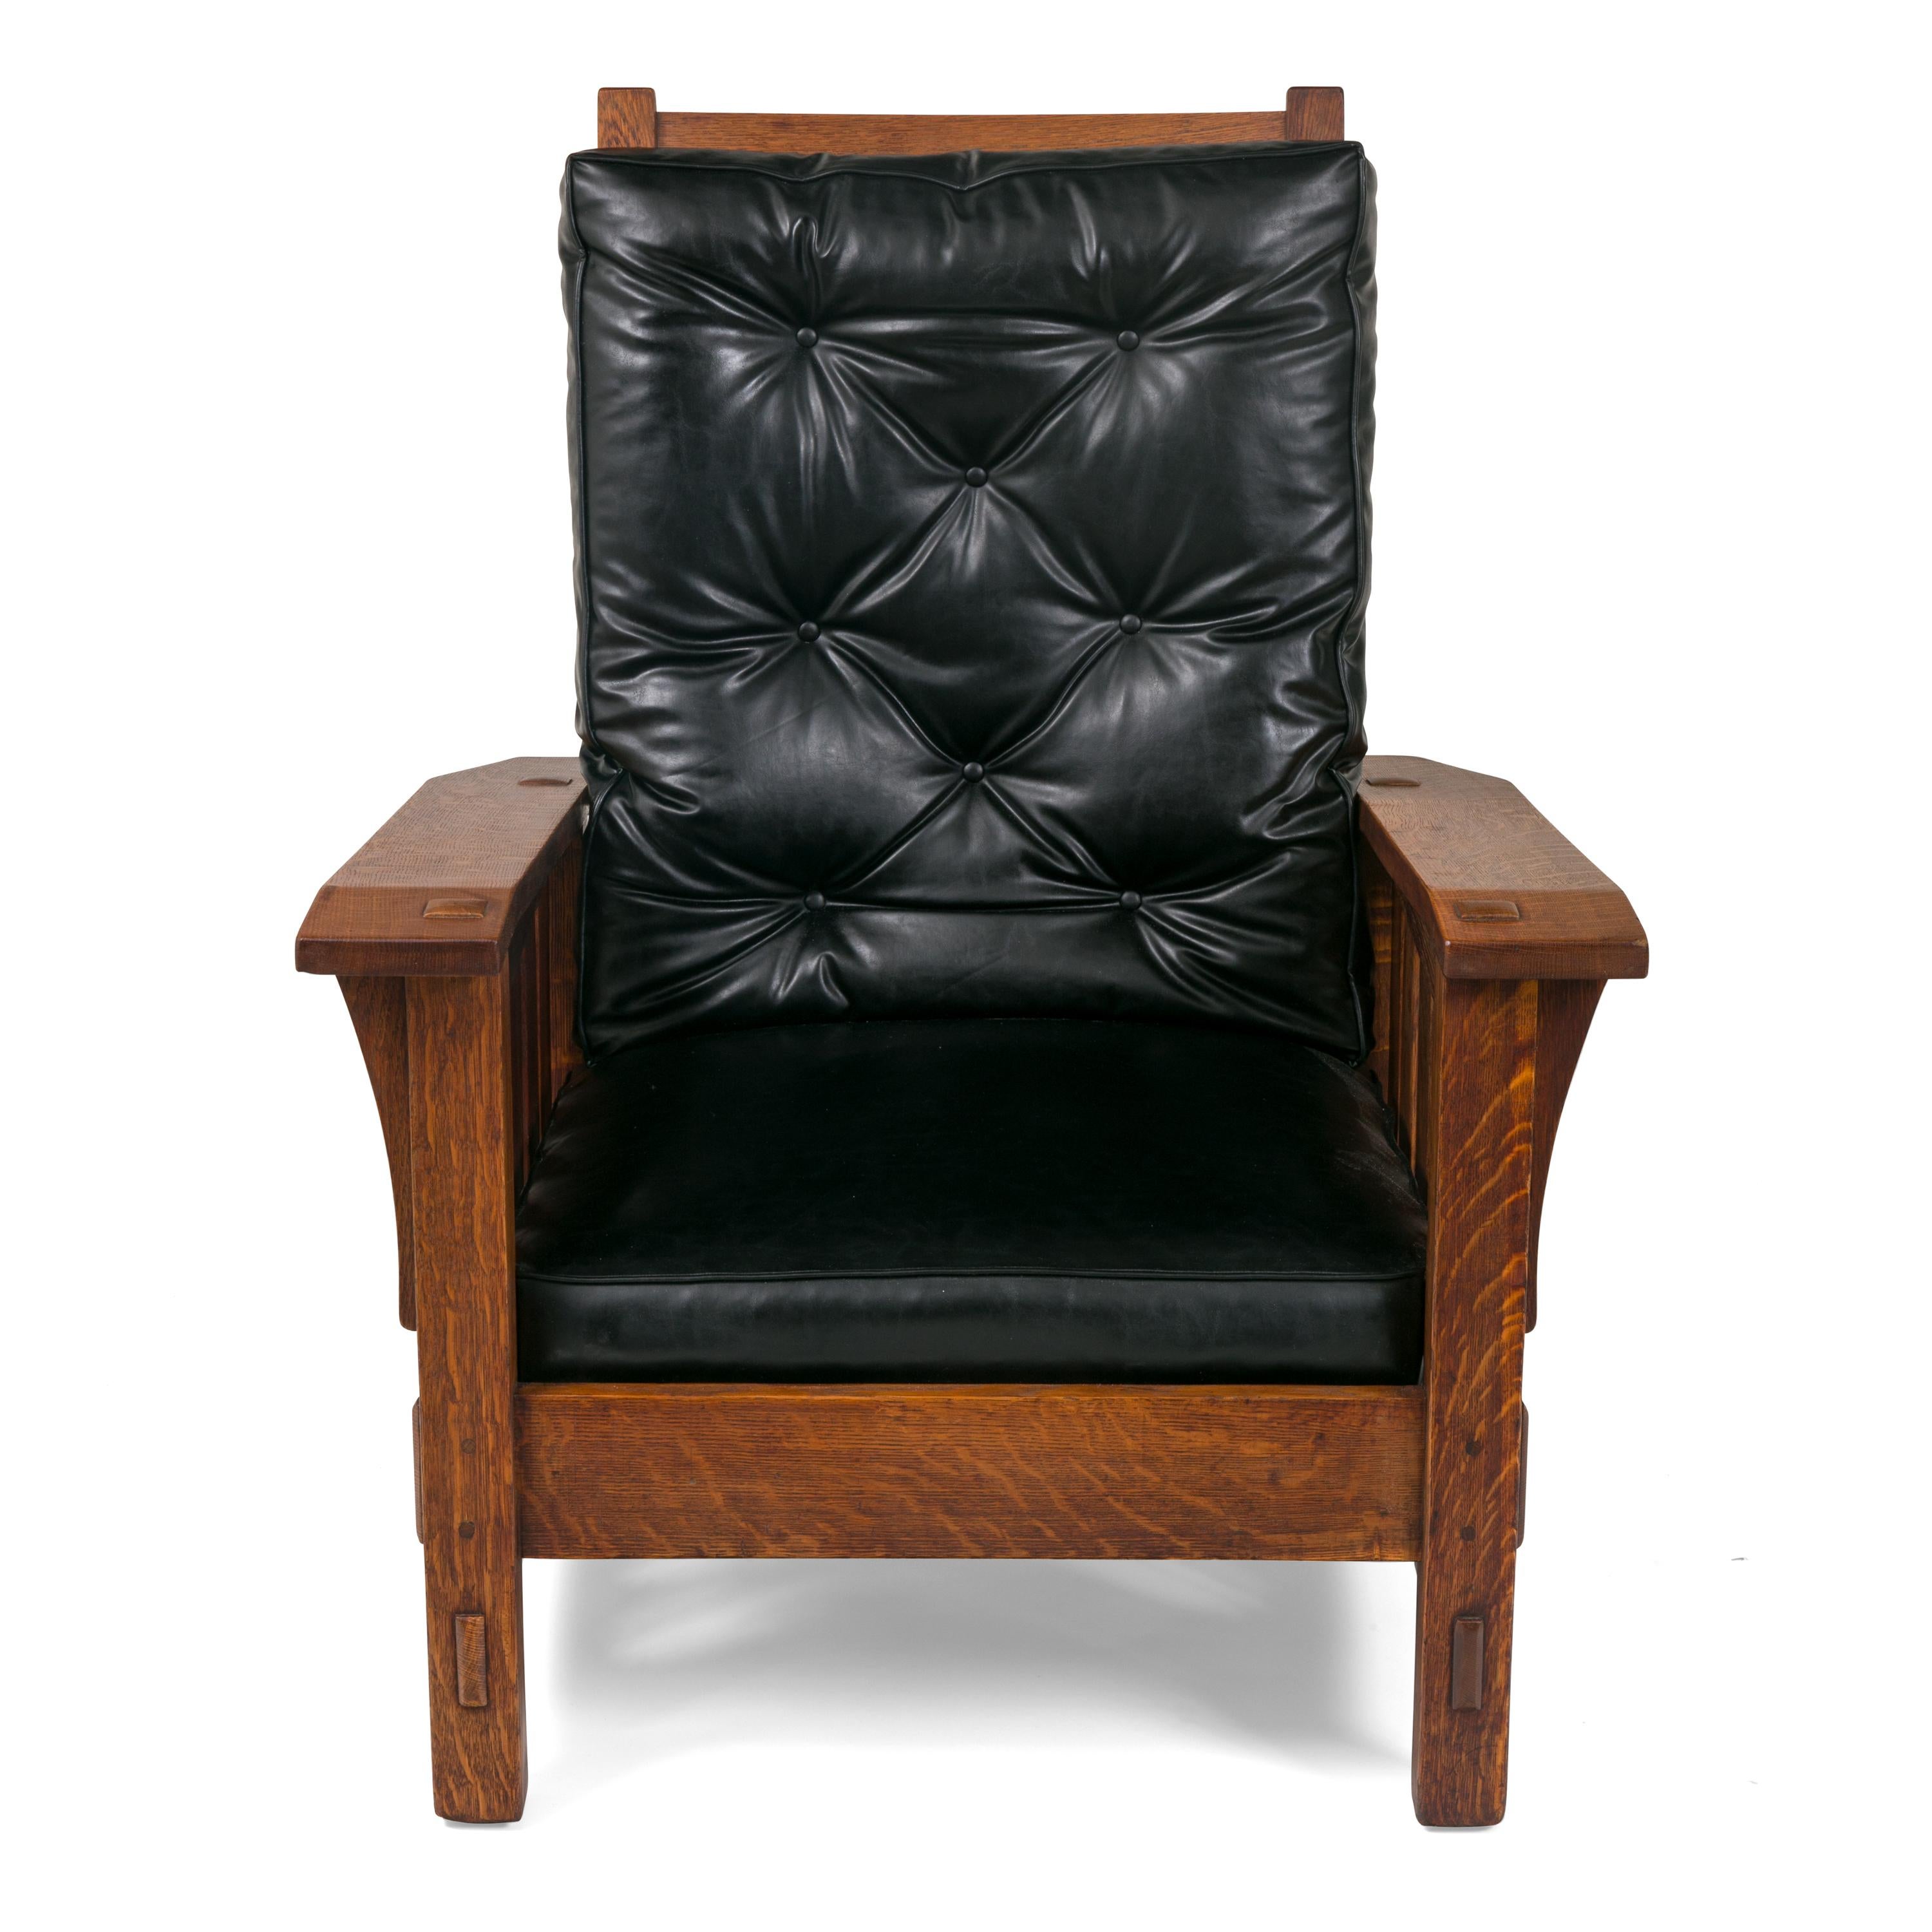 An iconic chair by the master of American Arts & Crafts, Gustav Stickley.